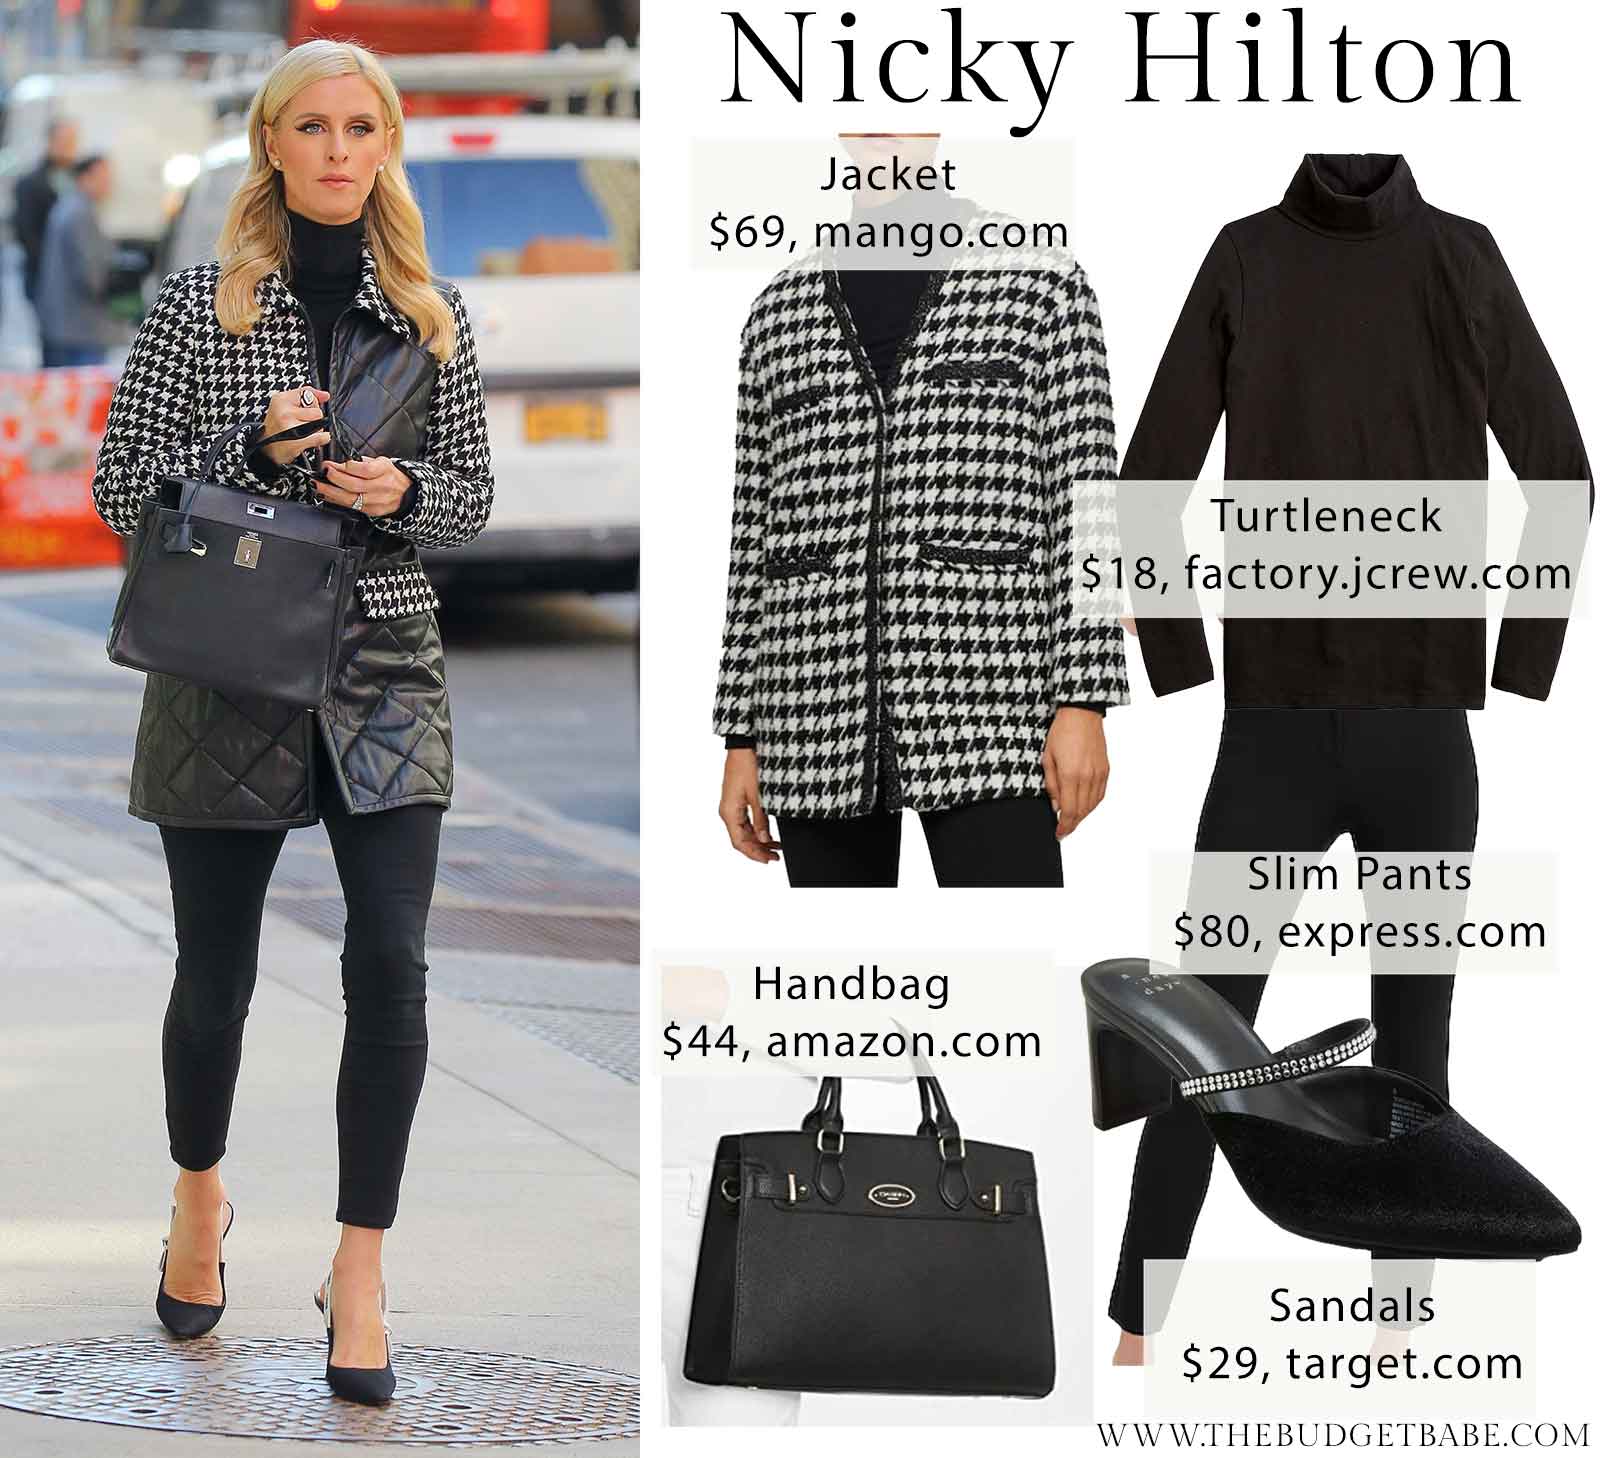 Nicky Hilton's houndstooth jacket look for less